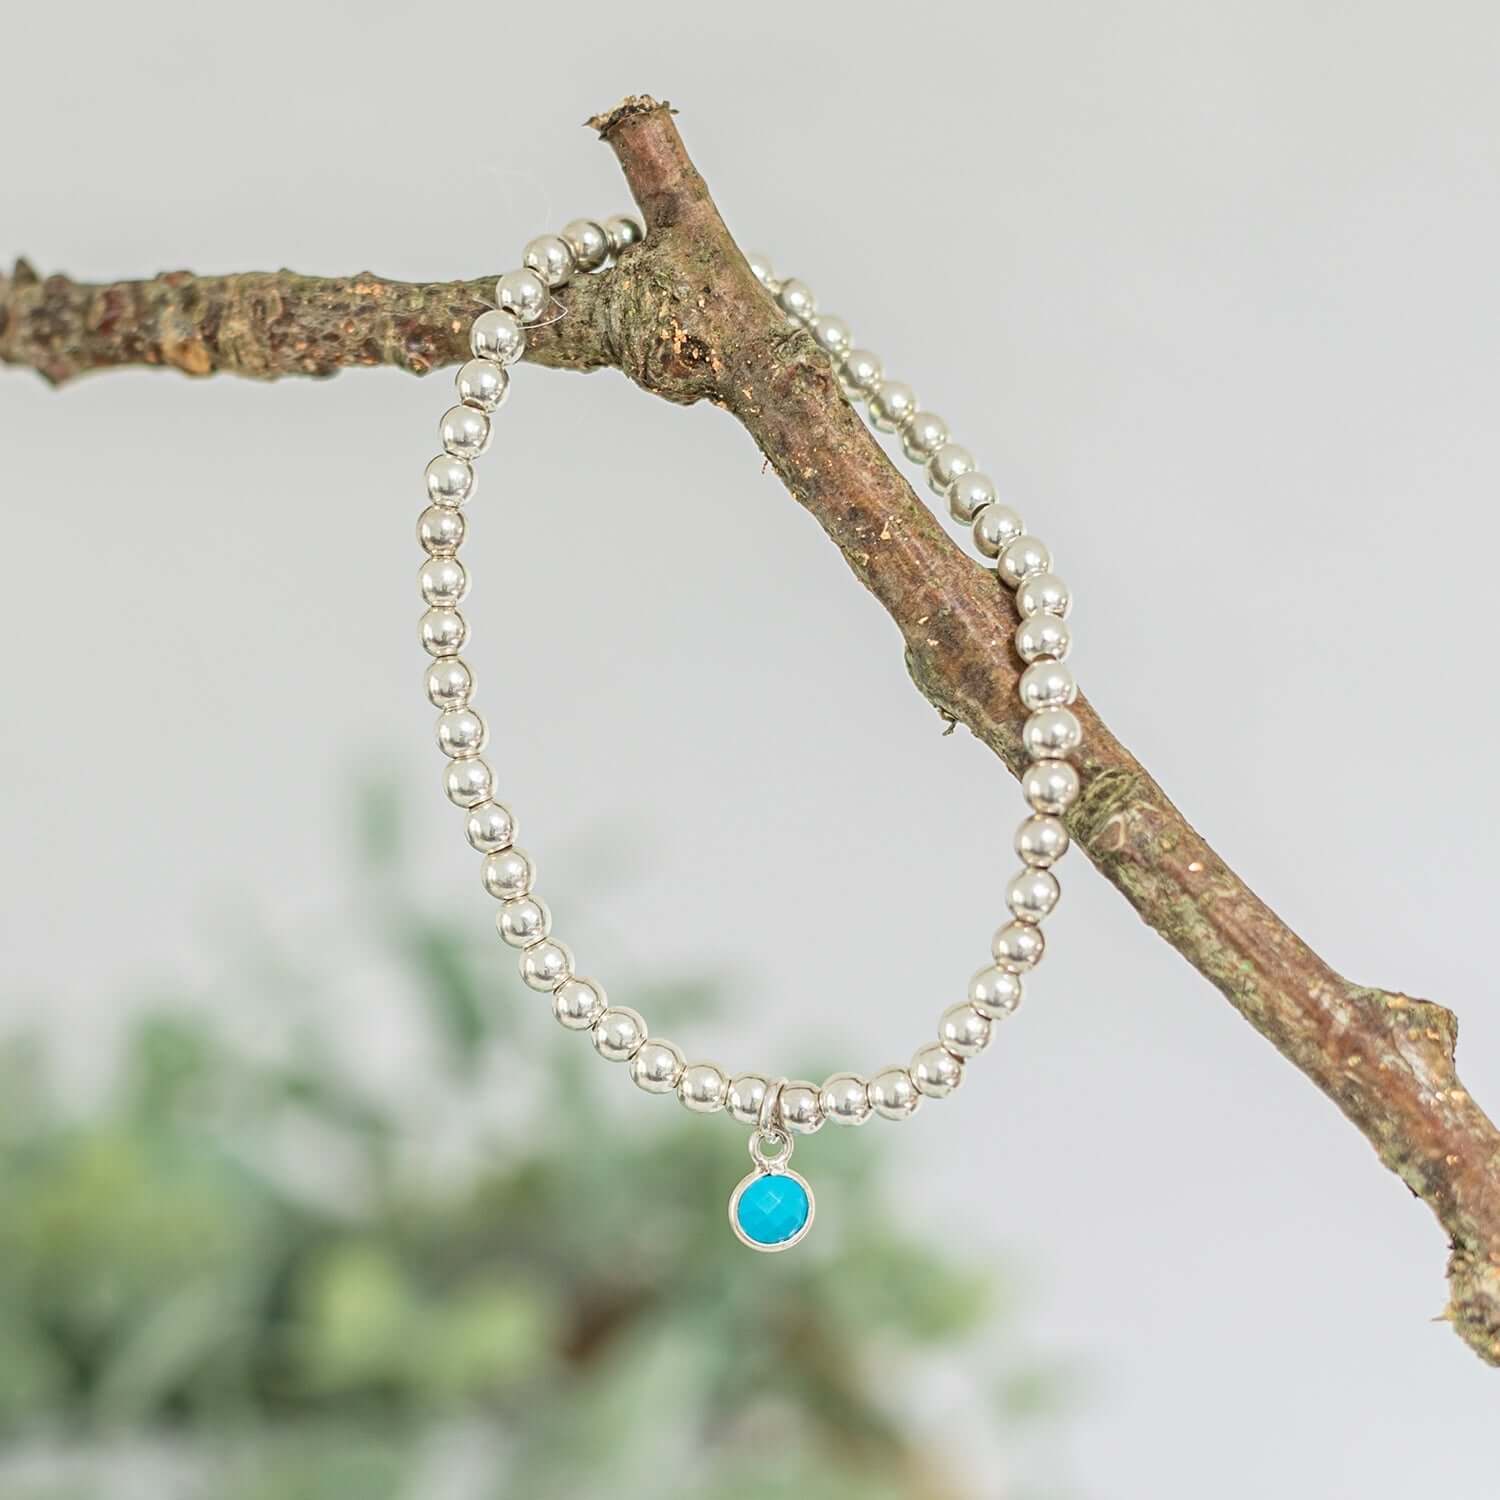  A beaded silver bracelet with a small turquoise charm, the December birthstone, hangs on a brown branch. The background is softly blurred with hints of green, giving a natural and serene vibe to the image